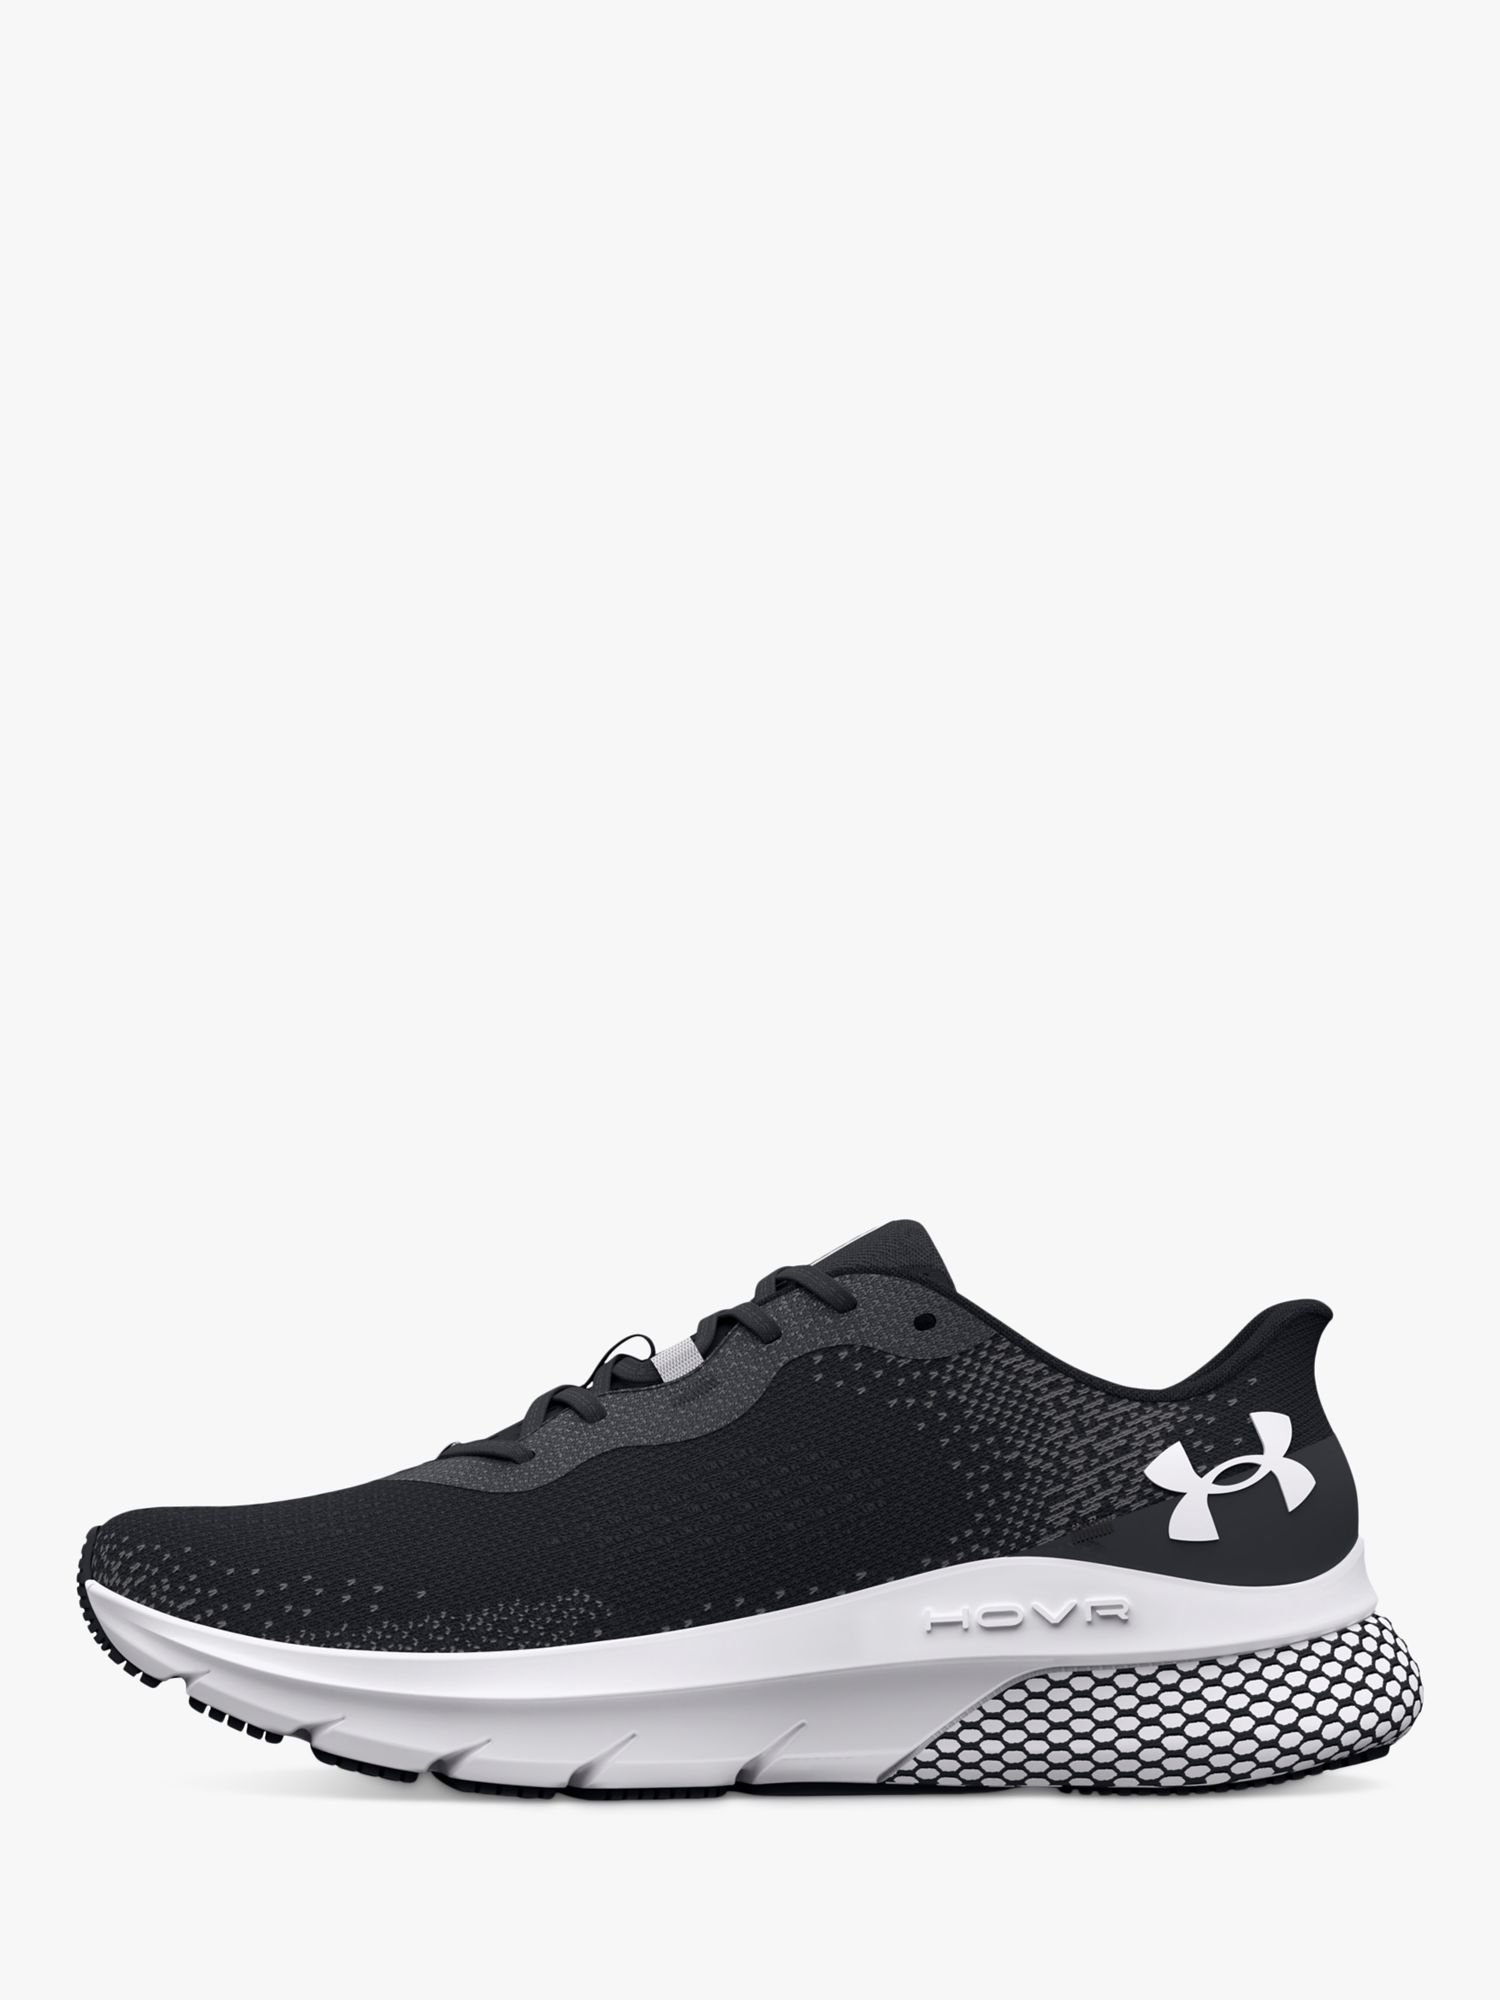 Under Armour HOVR Women's Sports Trainers, Black/White, 6